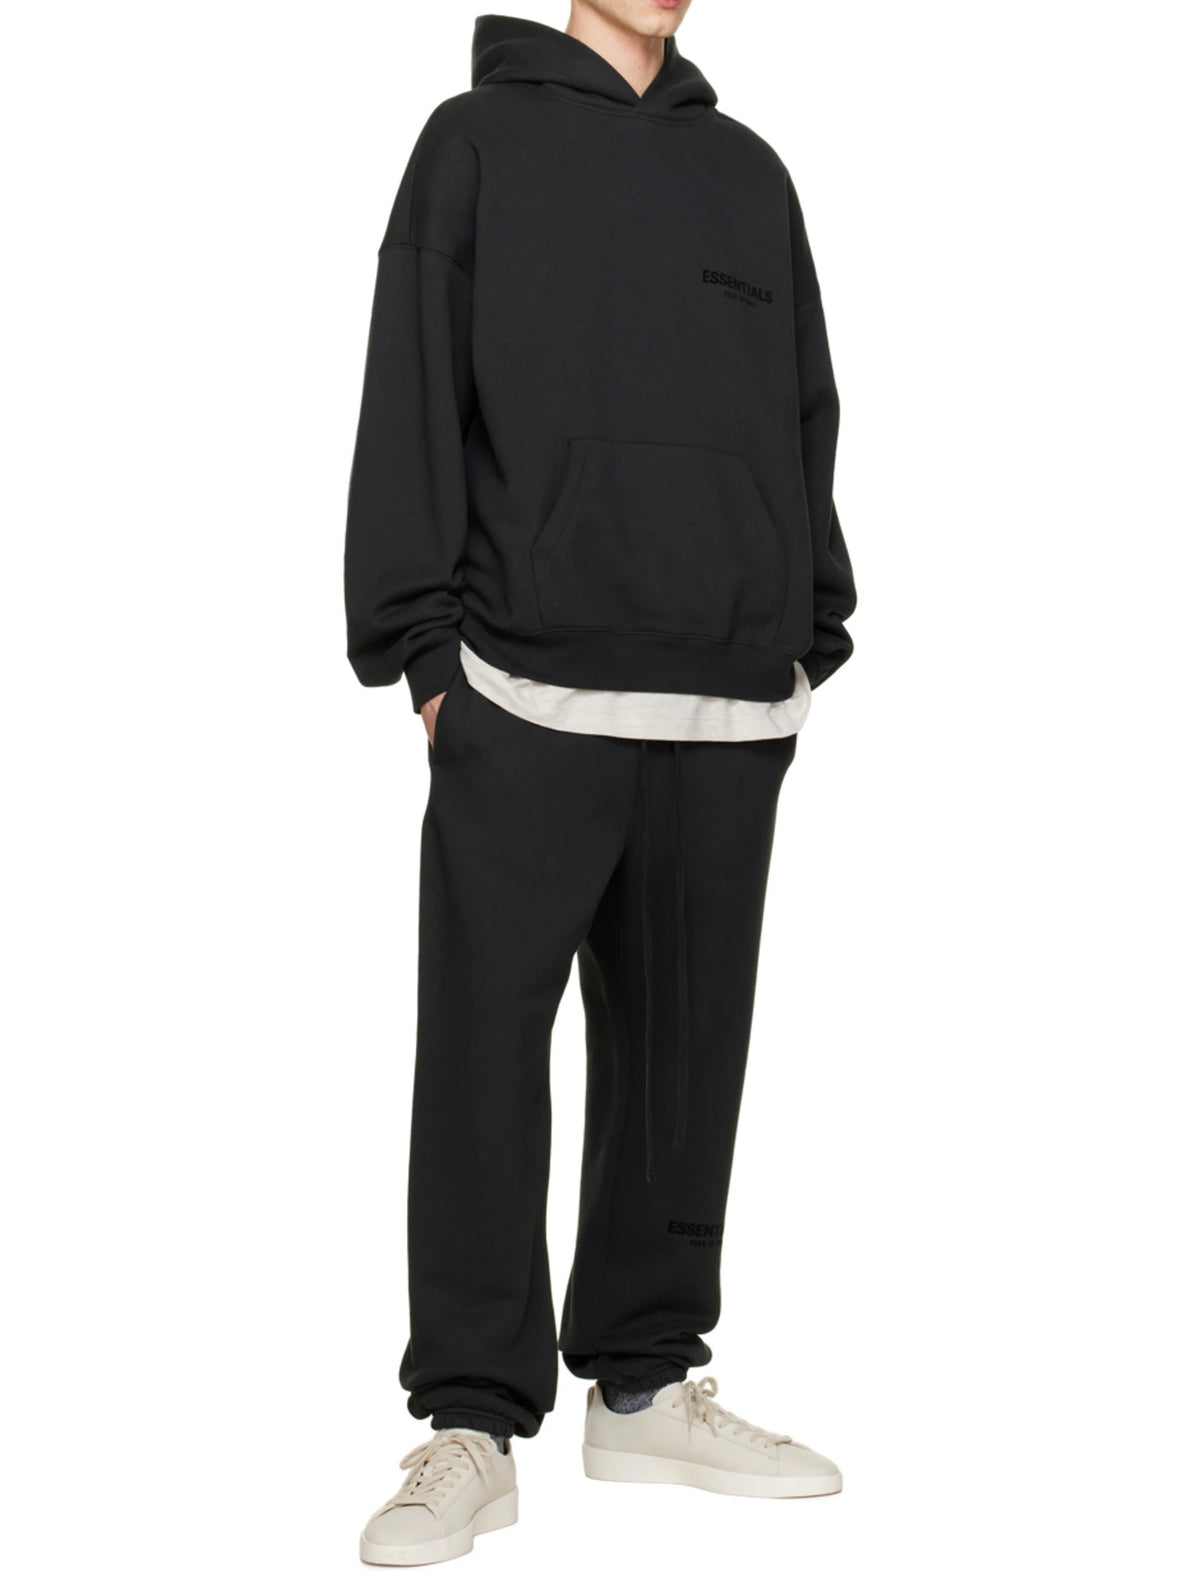 Fear Of God Essentials Tracksuit SS22 “Black”